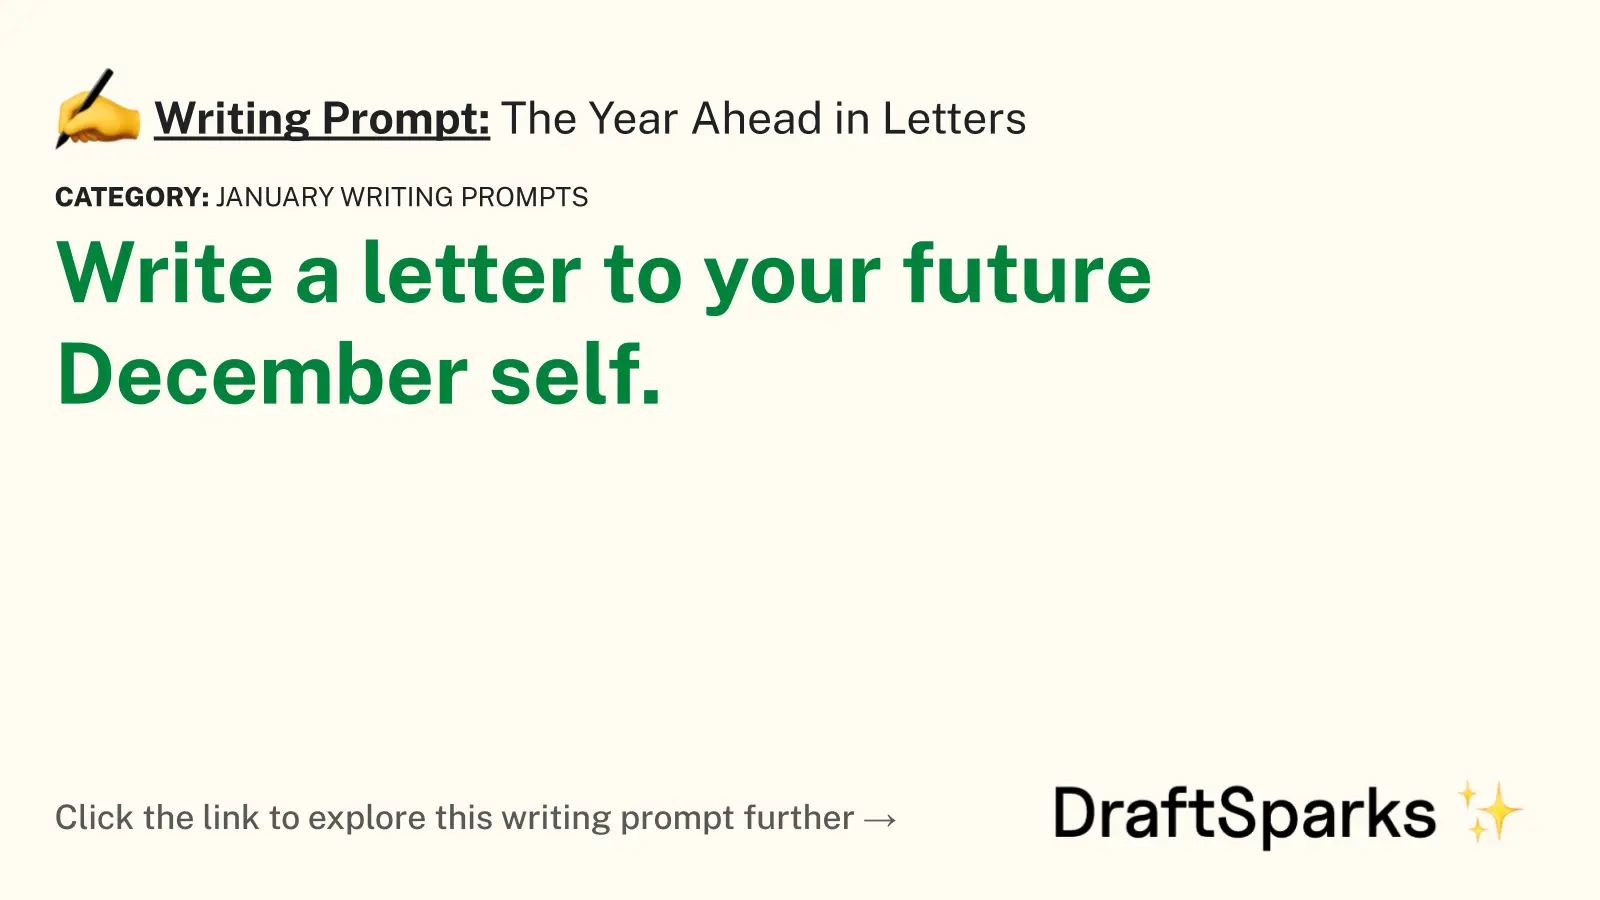 The Year Ahead in Letters